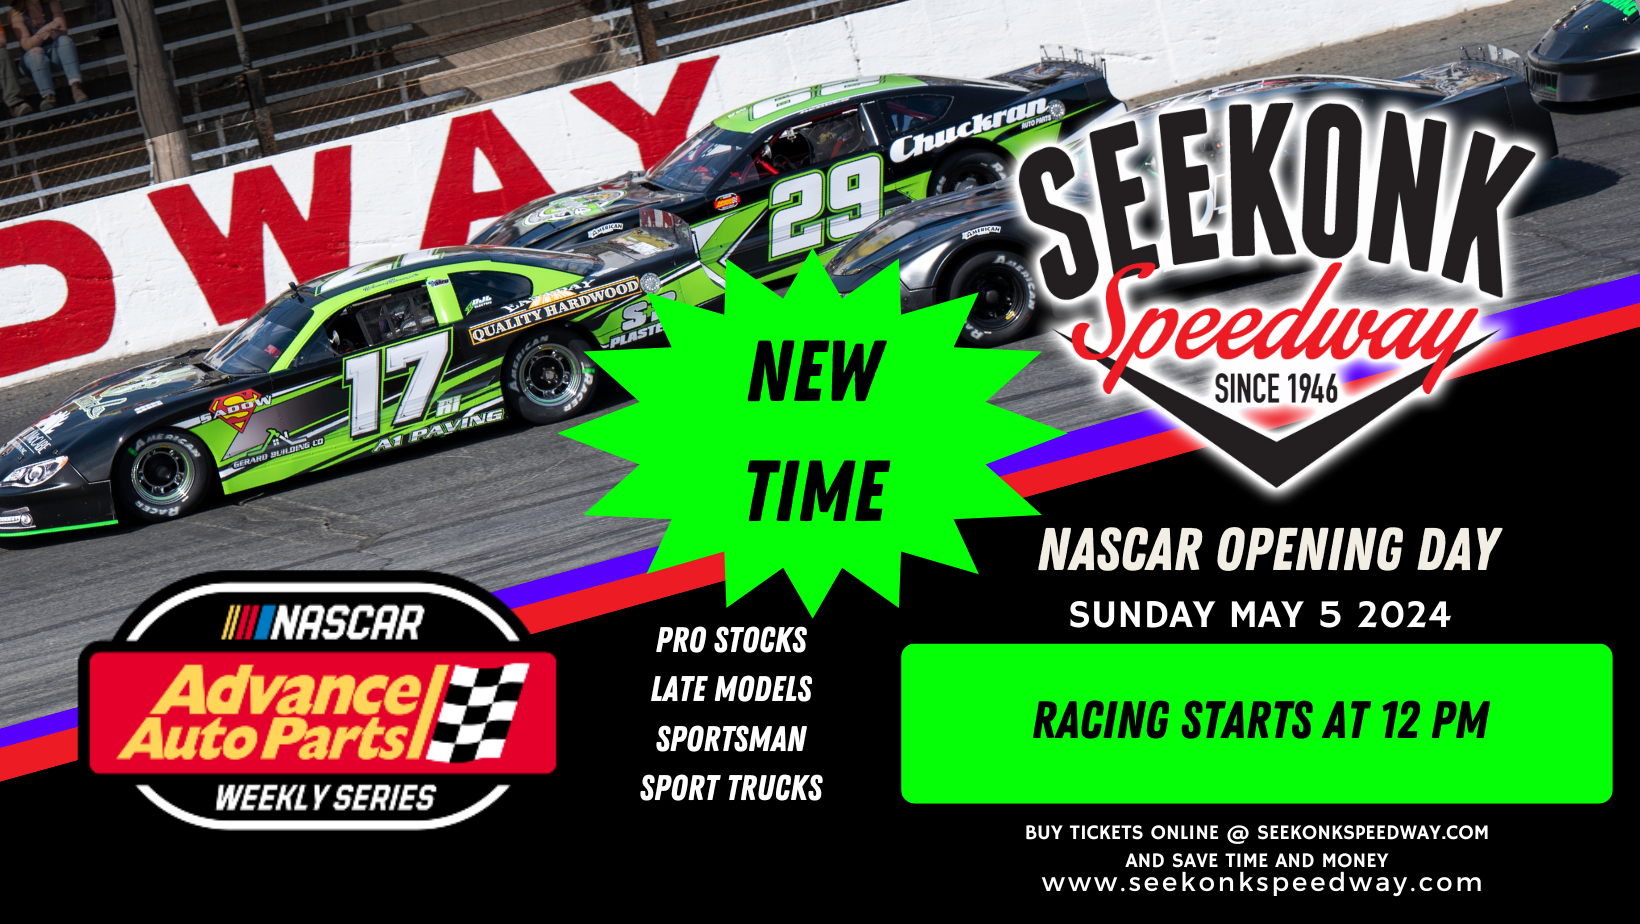 Seekonk Speedway Adjusts Start Time For NASCAR Opening Day To 12PM